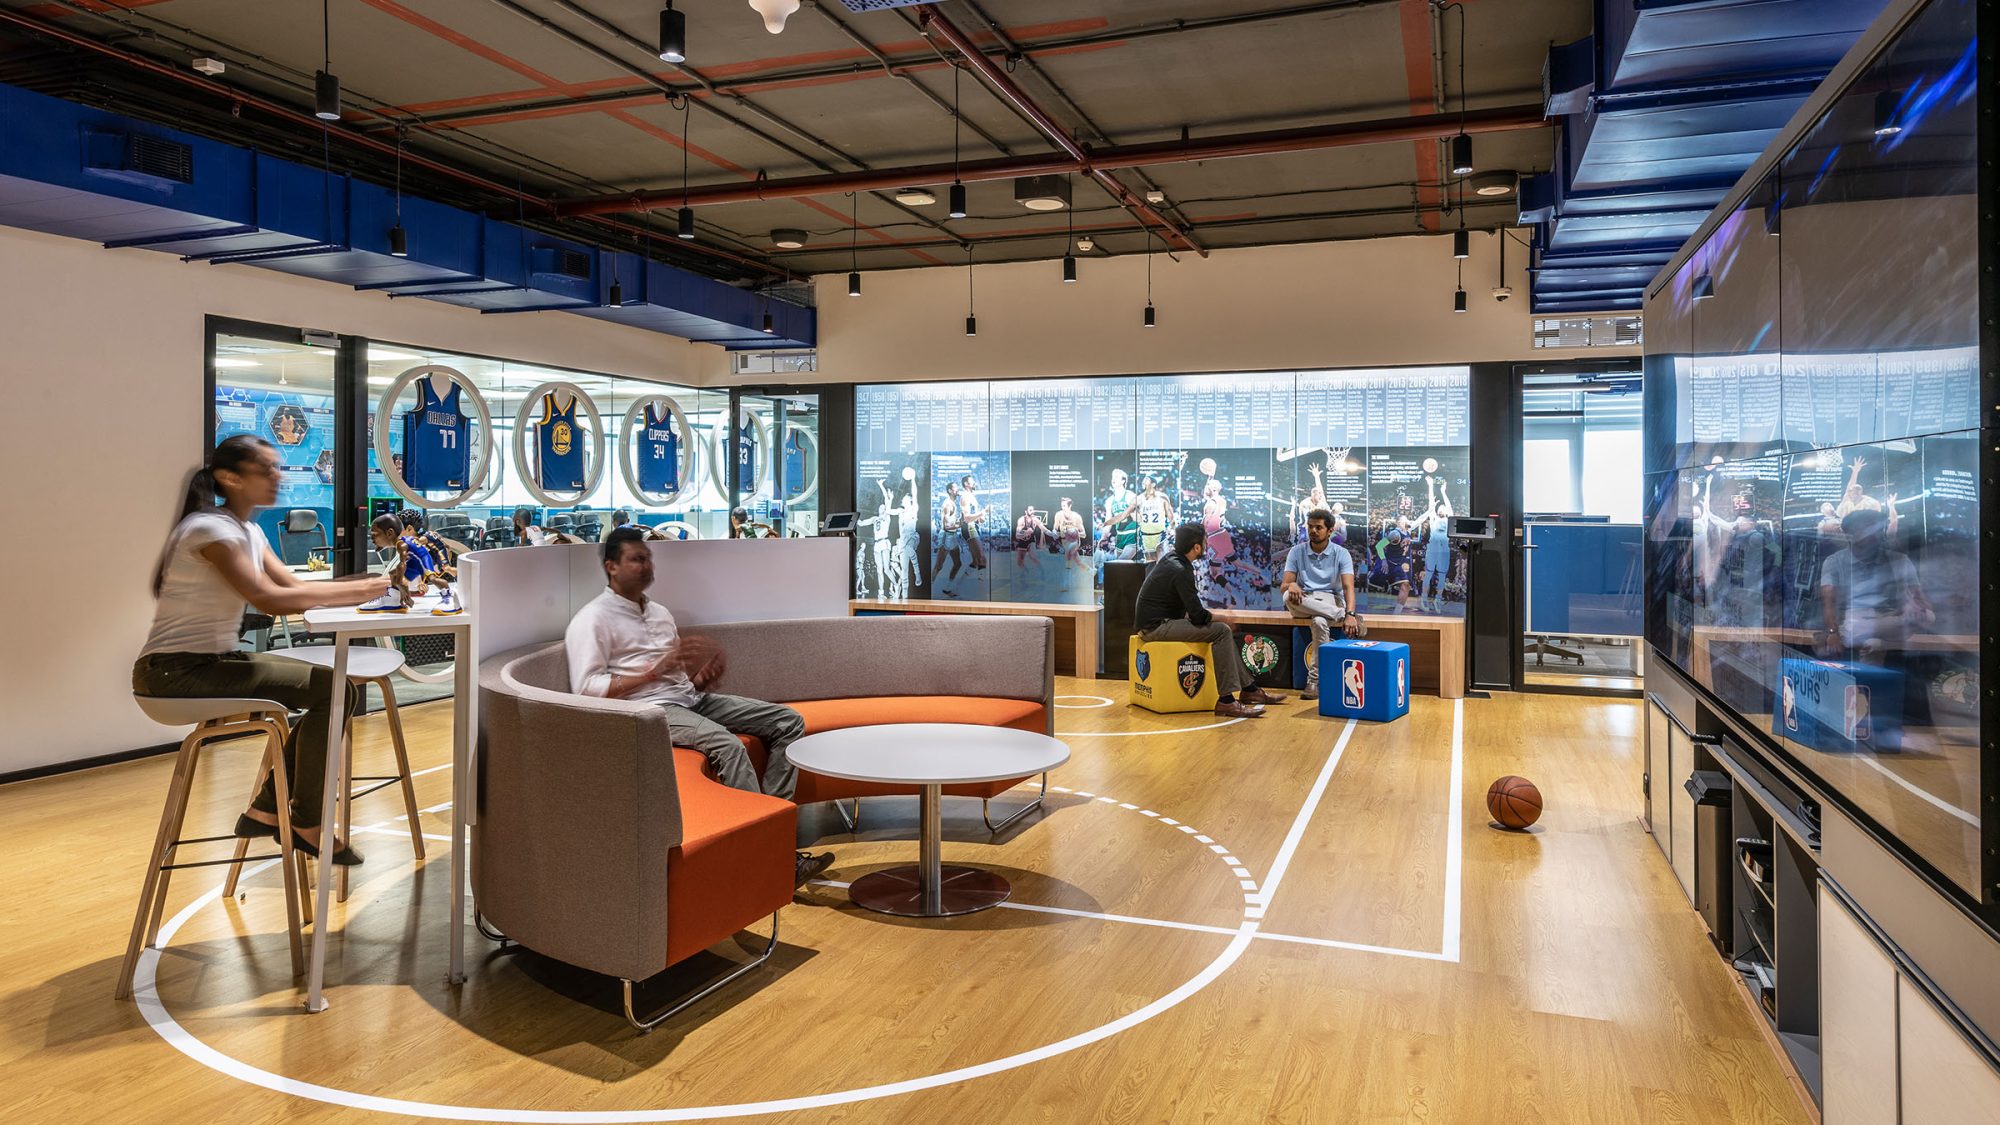 Immersive workplace design by M Moser in Mumbai for NBA featuring a fully branded employee experience.